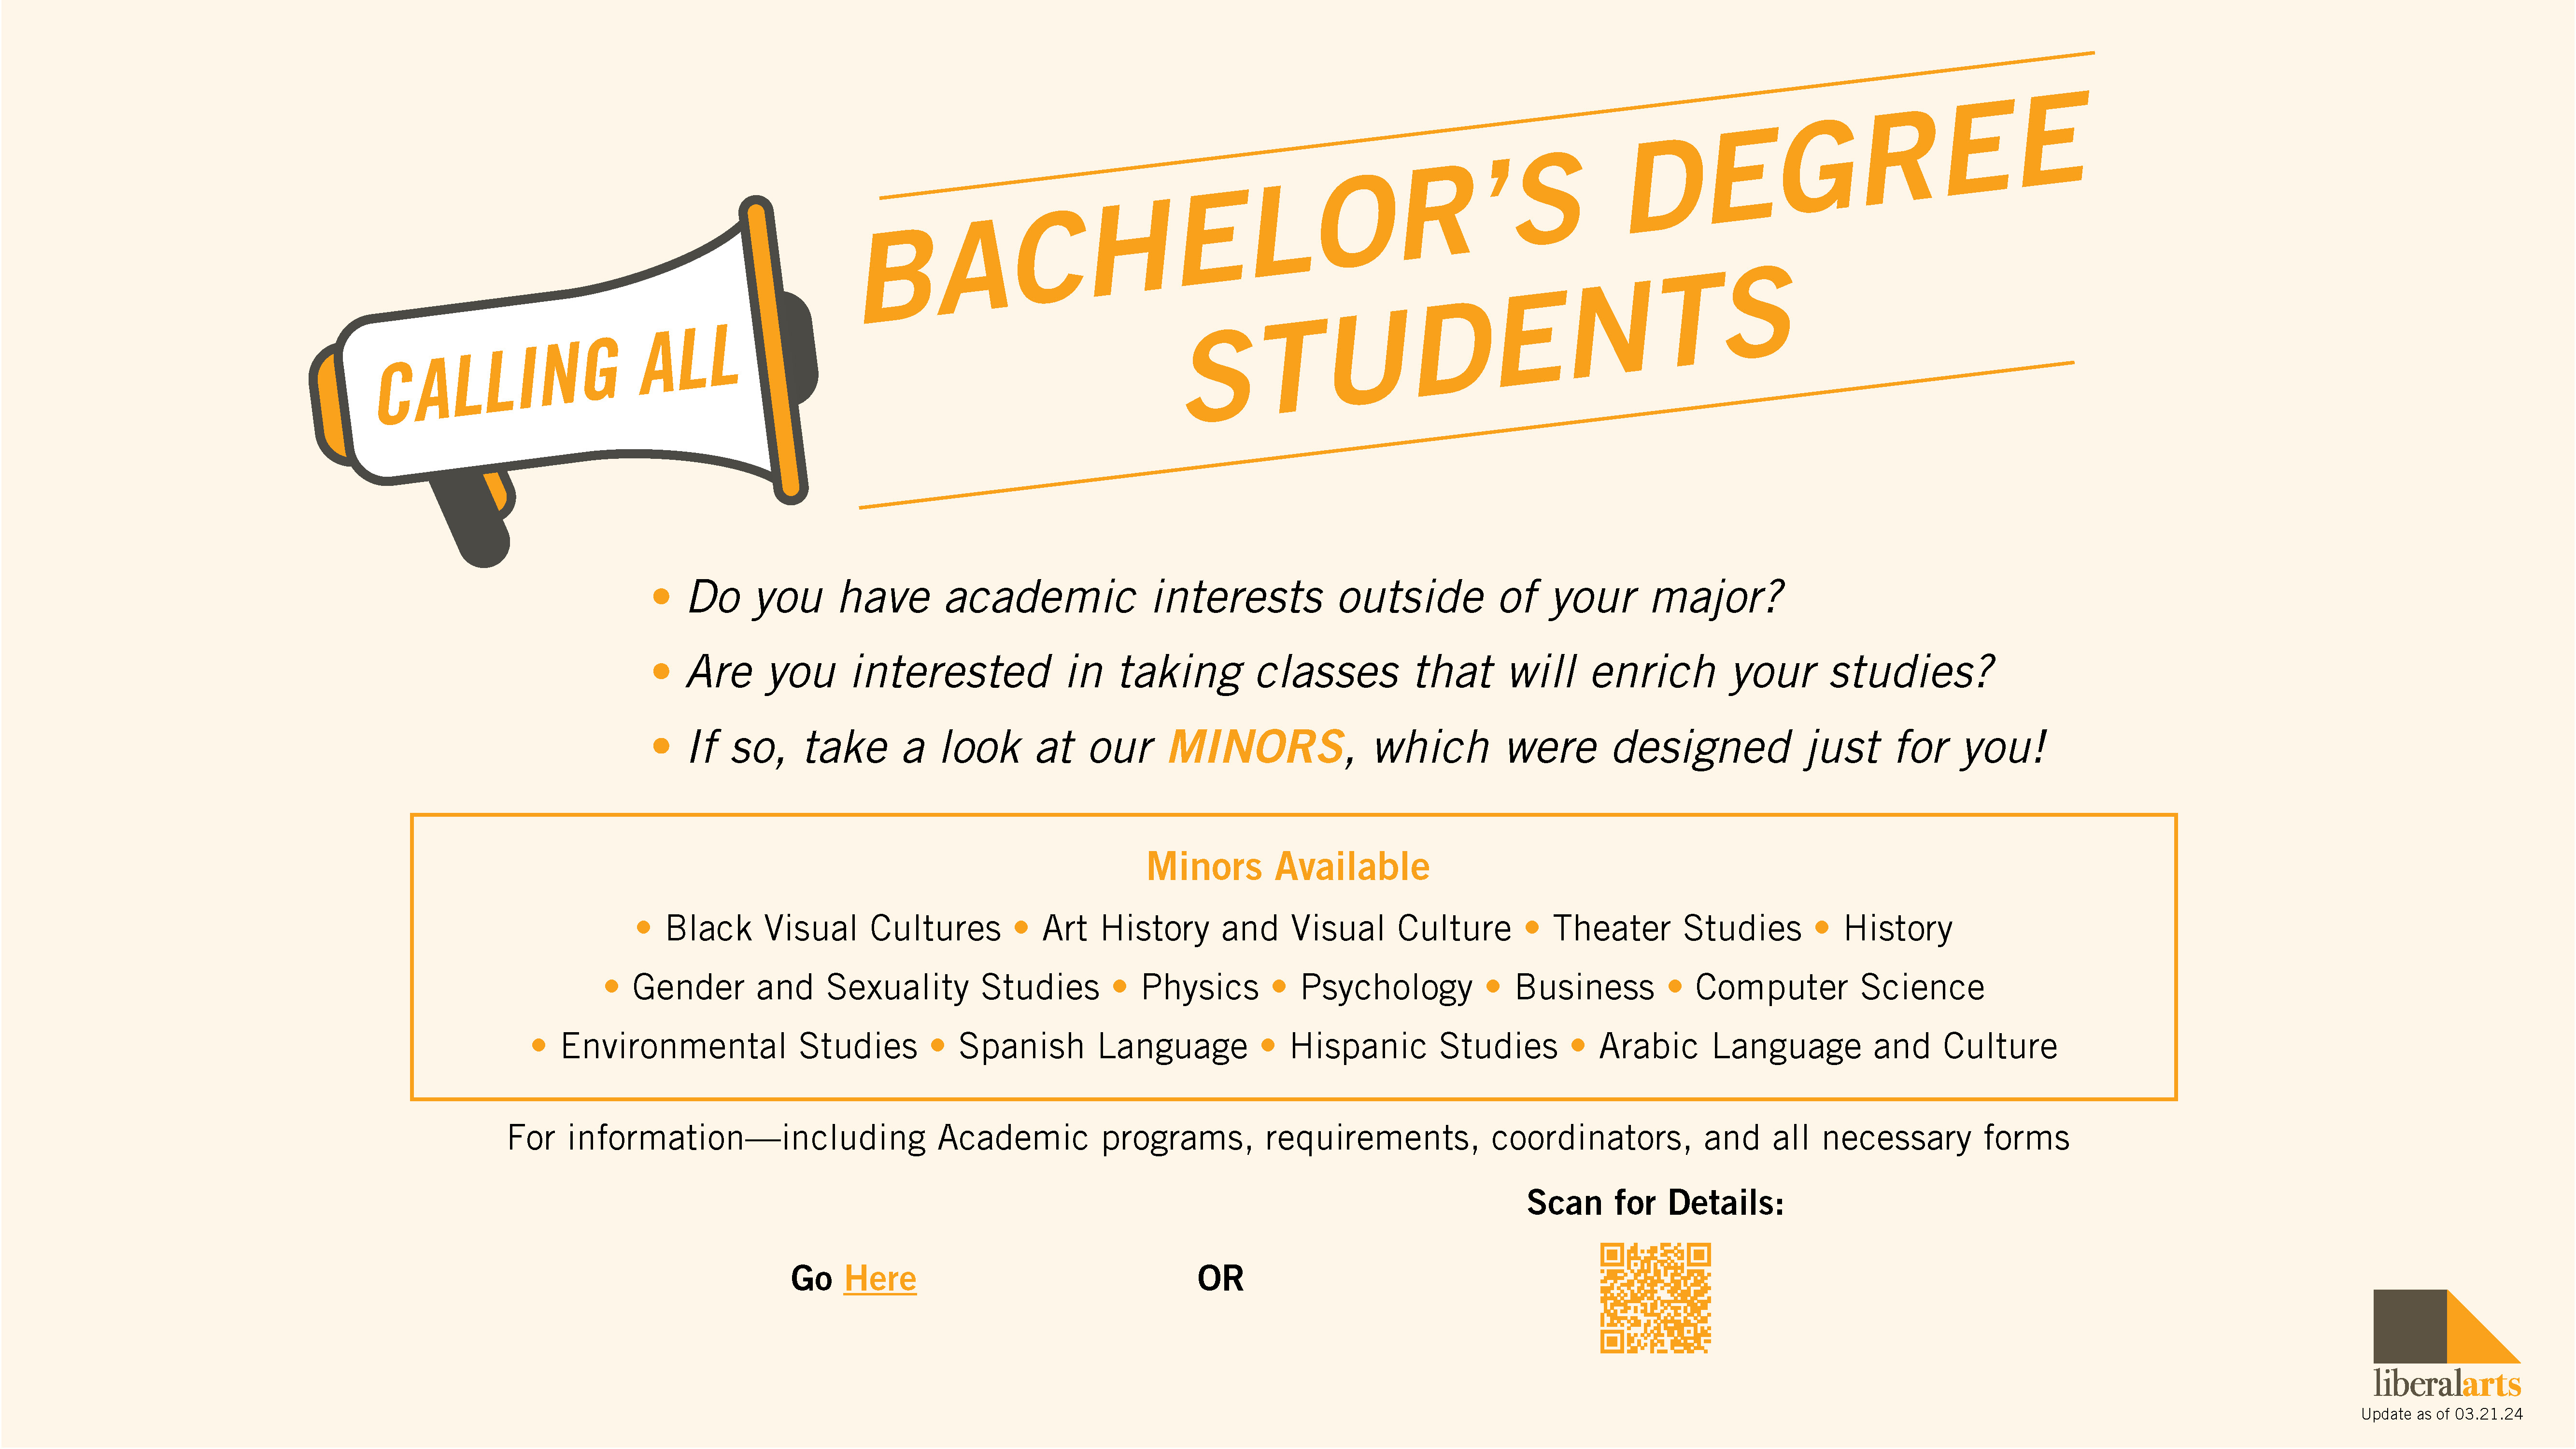 Calling All Bachelor Degree Students